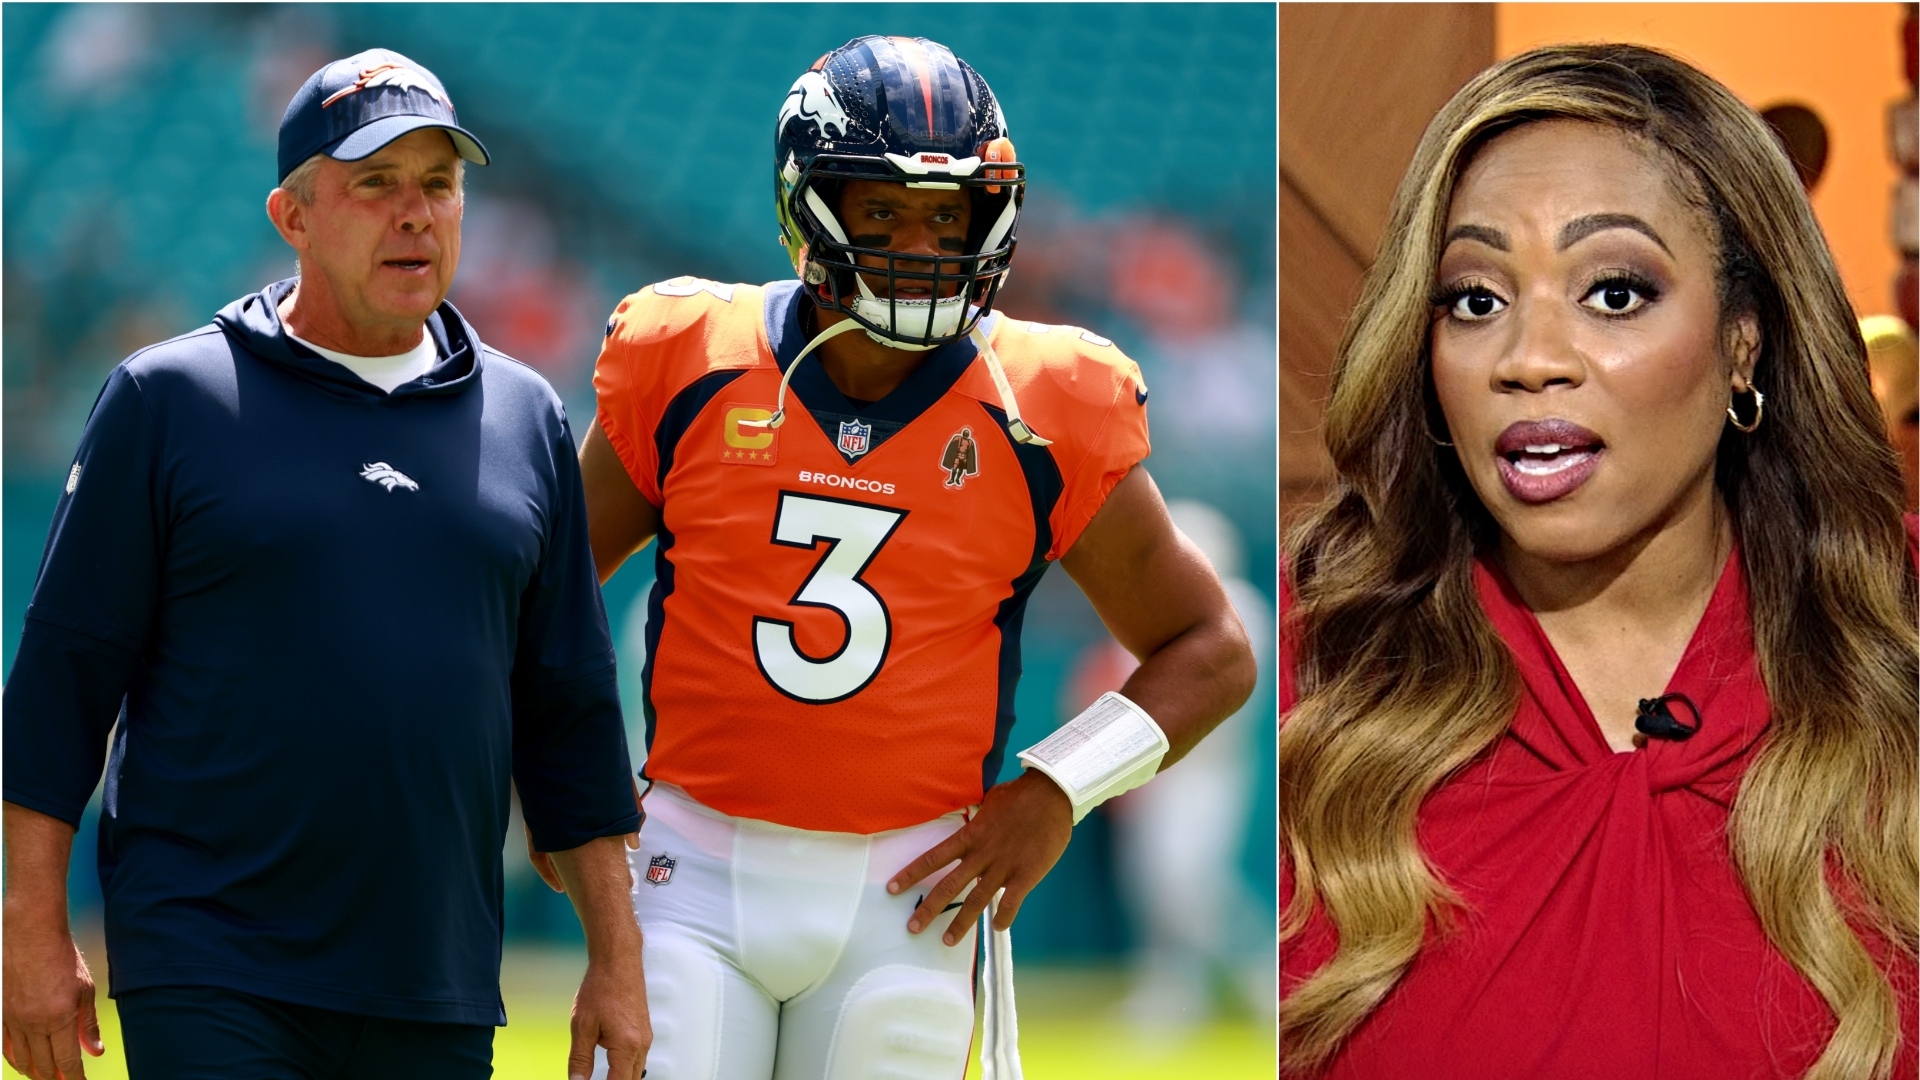 Sean Payton or Russell Wilson: Who is to blame for the Broncos' struggles?